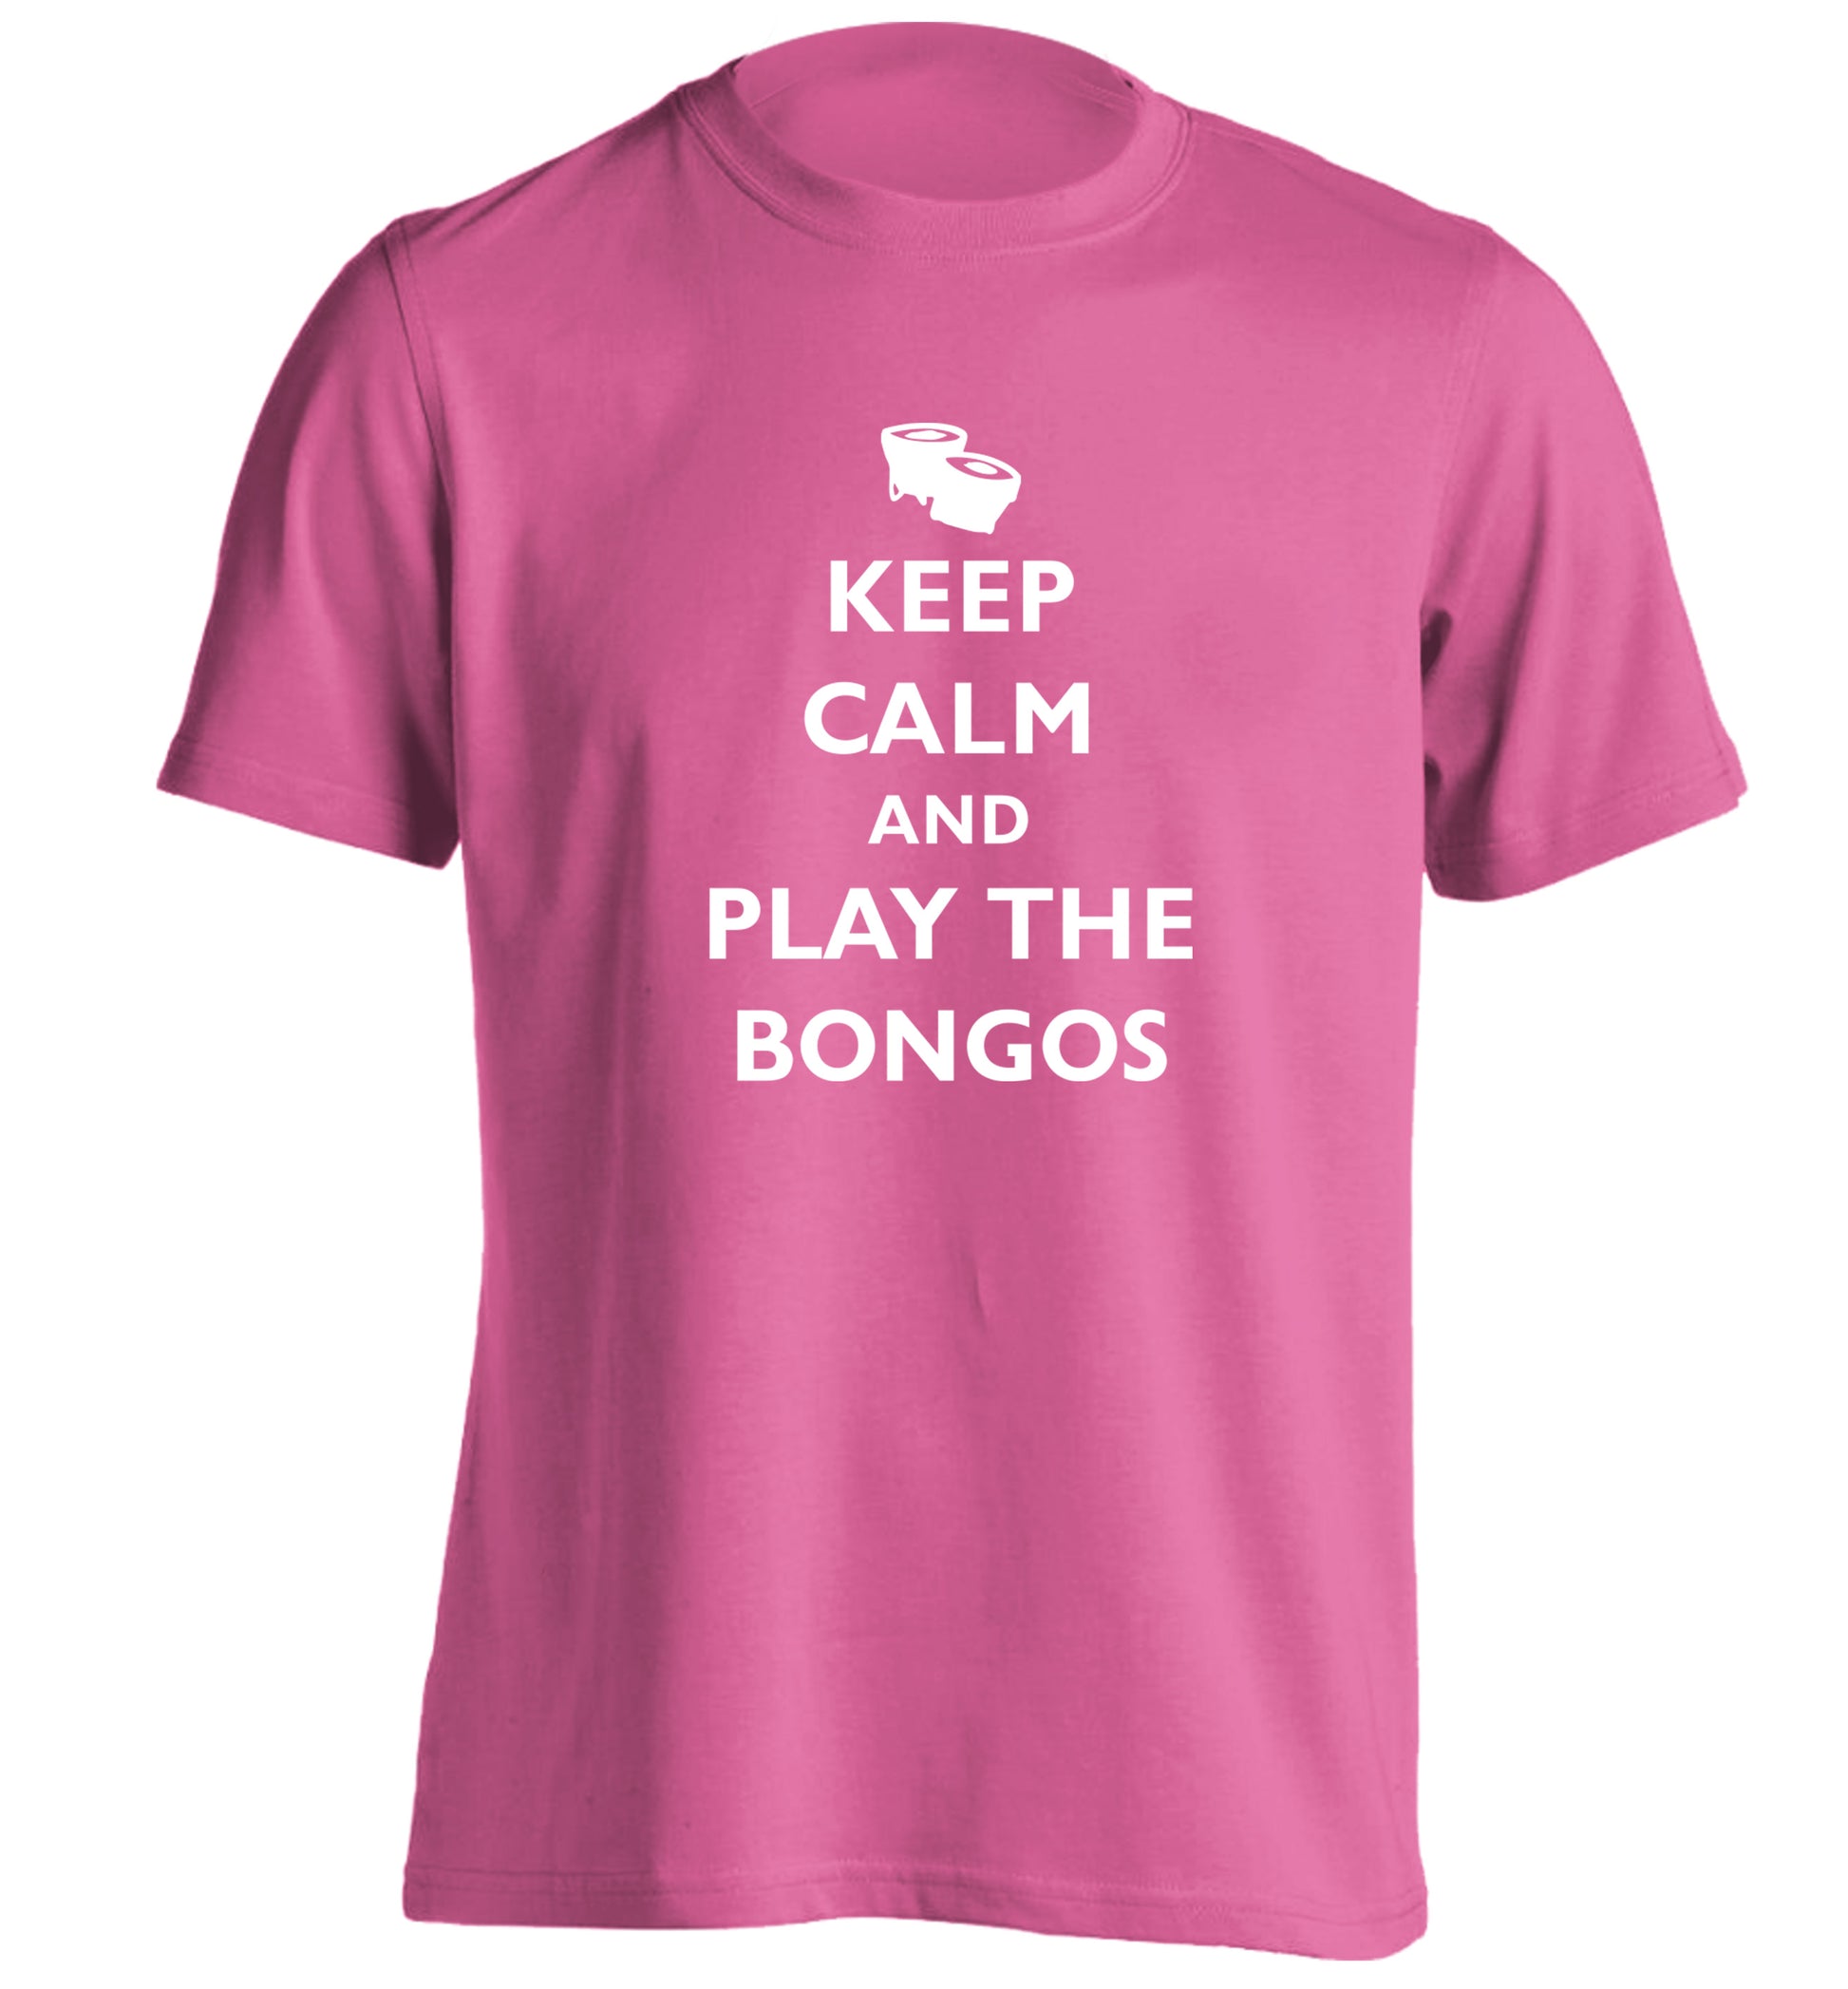 Keep calm and play the bongos adults unisex pink Tshirt 2XL